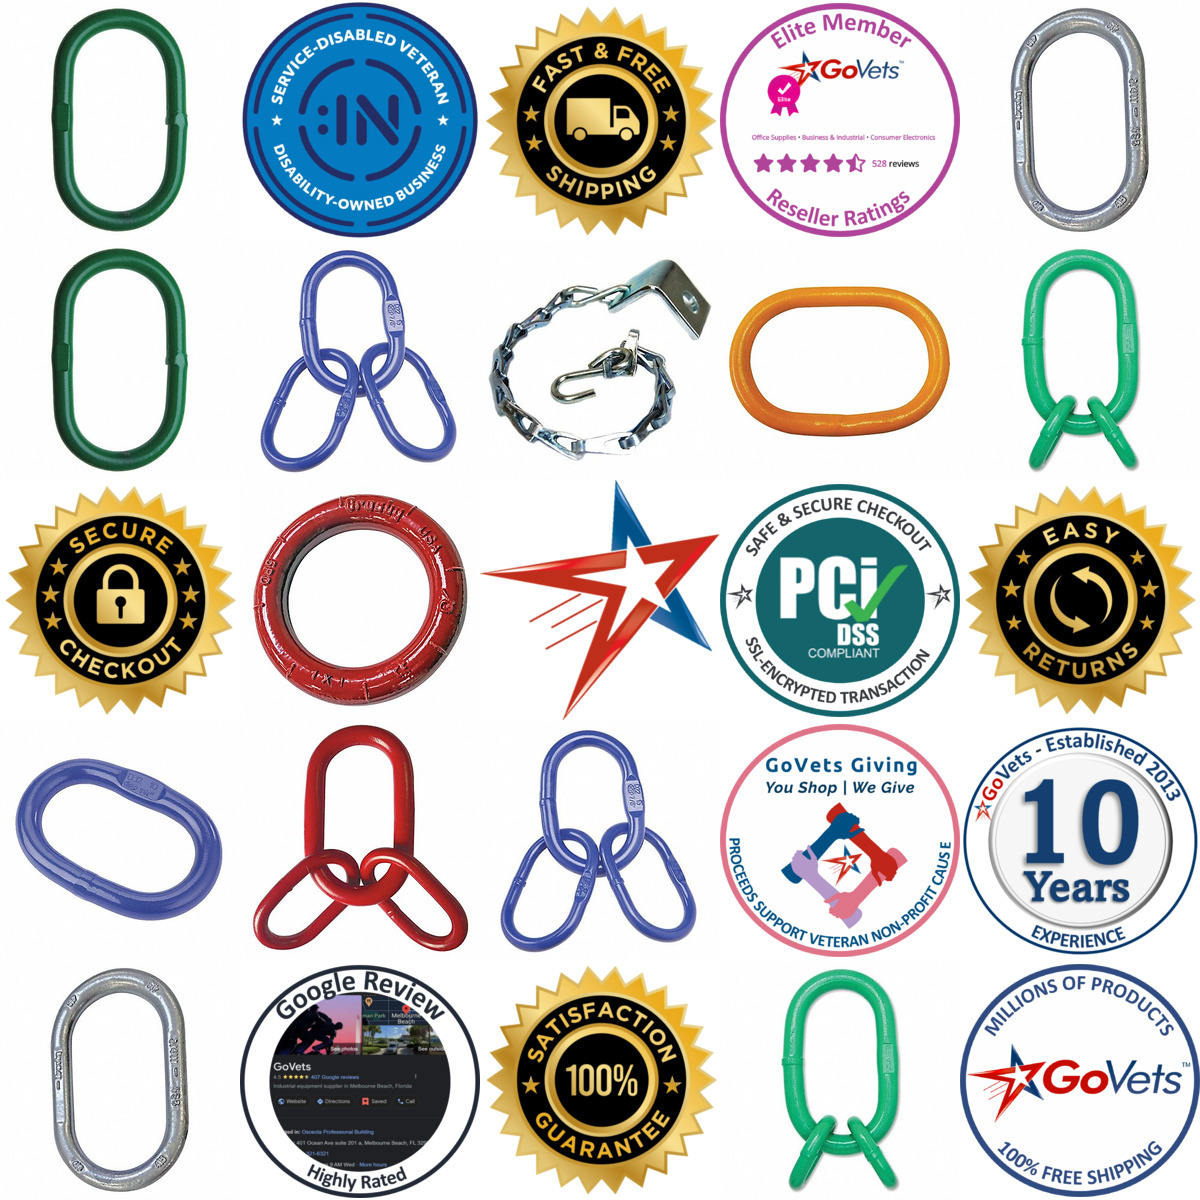 A selection of Master Links products on GoVets